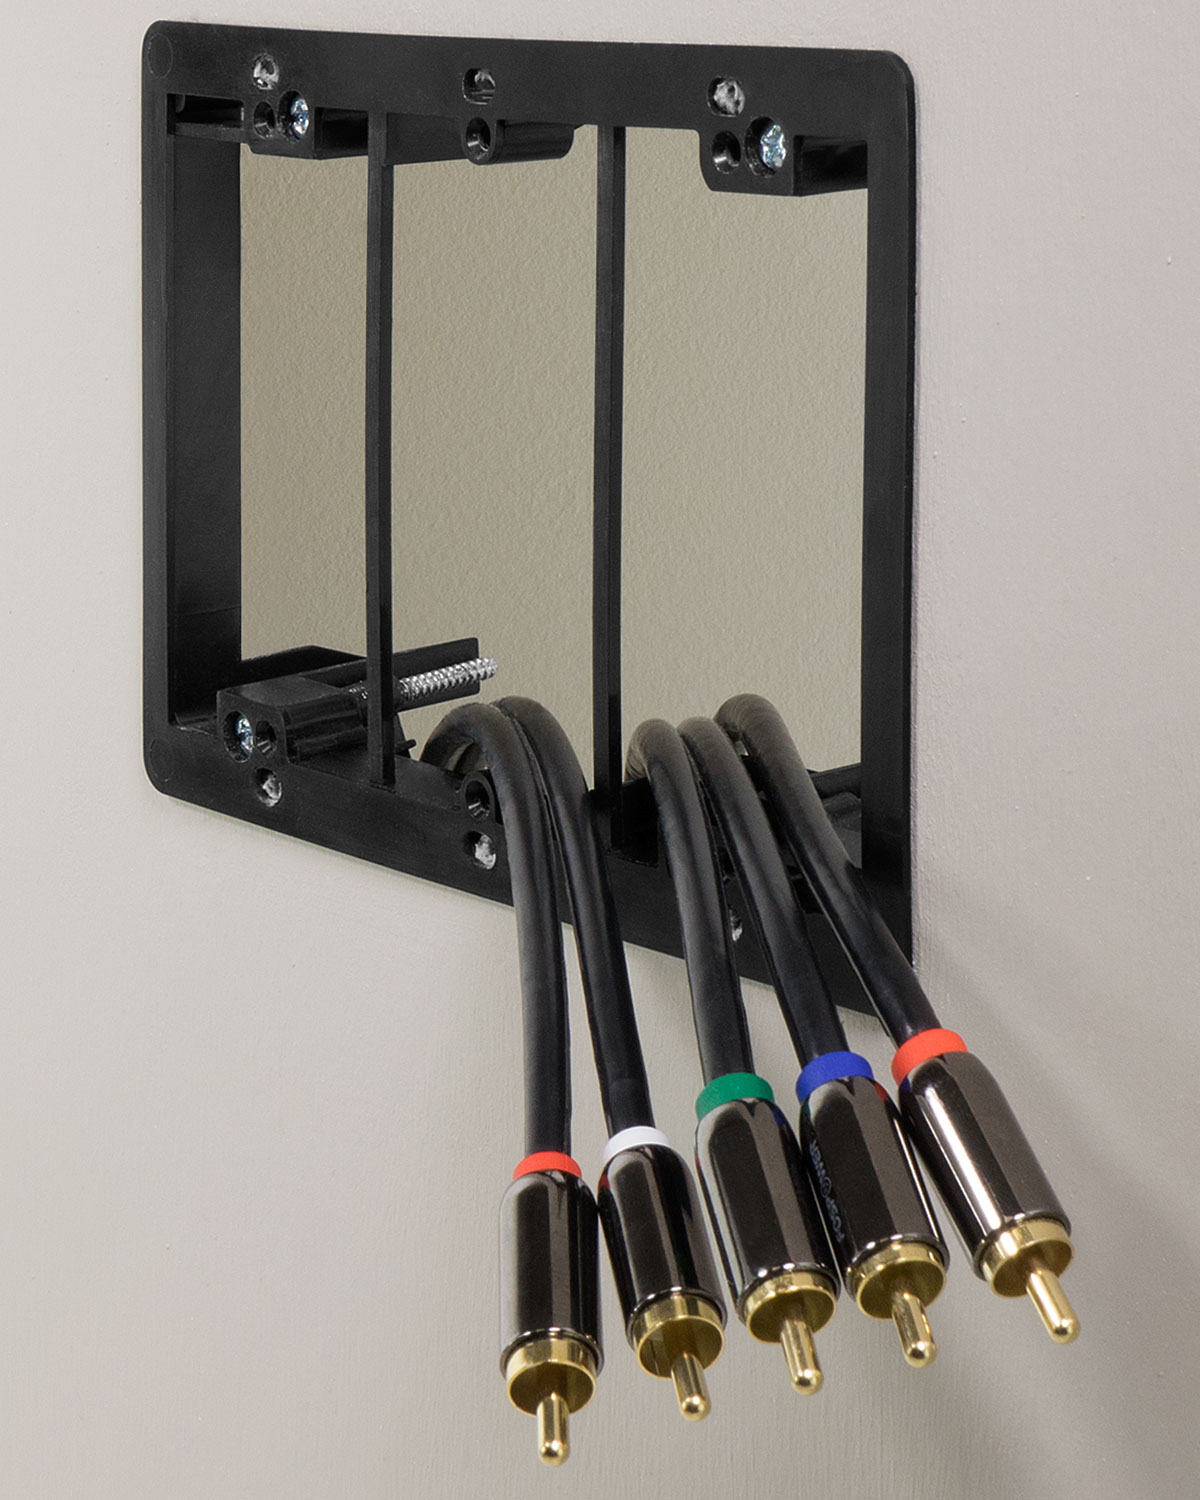 Low Voltage Mounting Bracket (3 Gang), Fosmon Low Voltage Mounting Bracket (Mounting Screws Included) for Telephone Wires, Network Cables, HDMI, Coaxial, and Speaker Cables - image 2 of 4